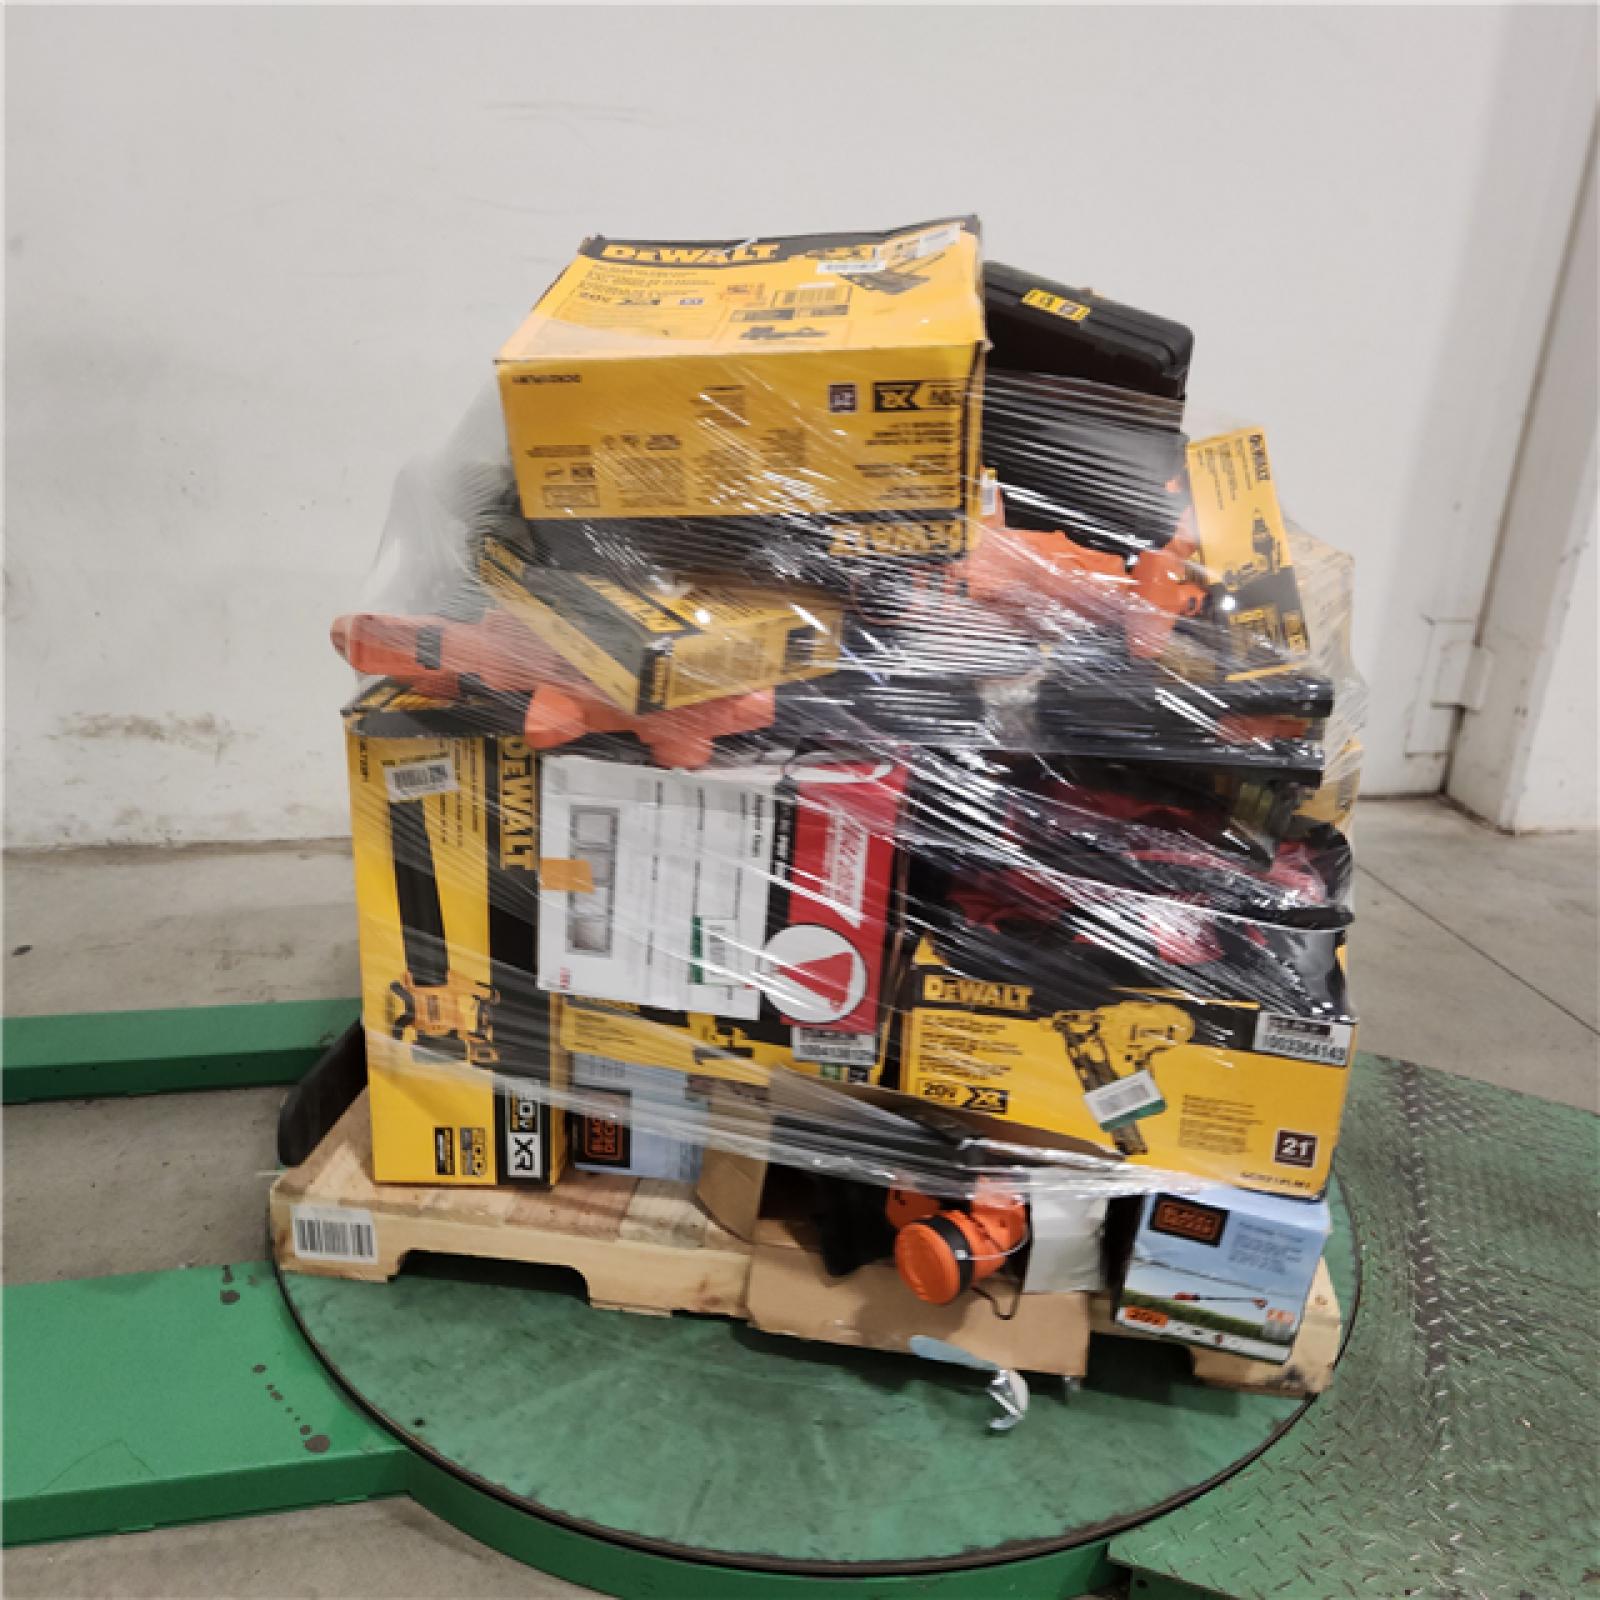 Dallas Location - As-Is Tool Pallet